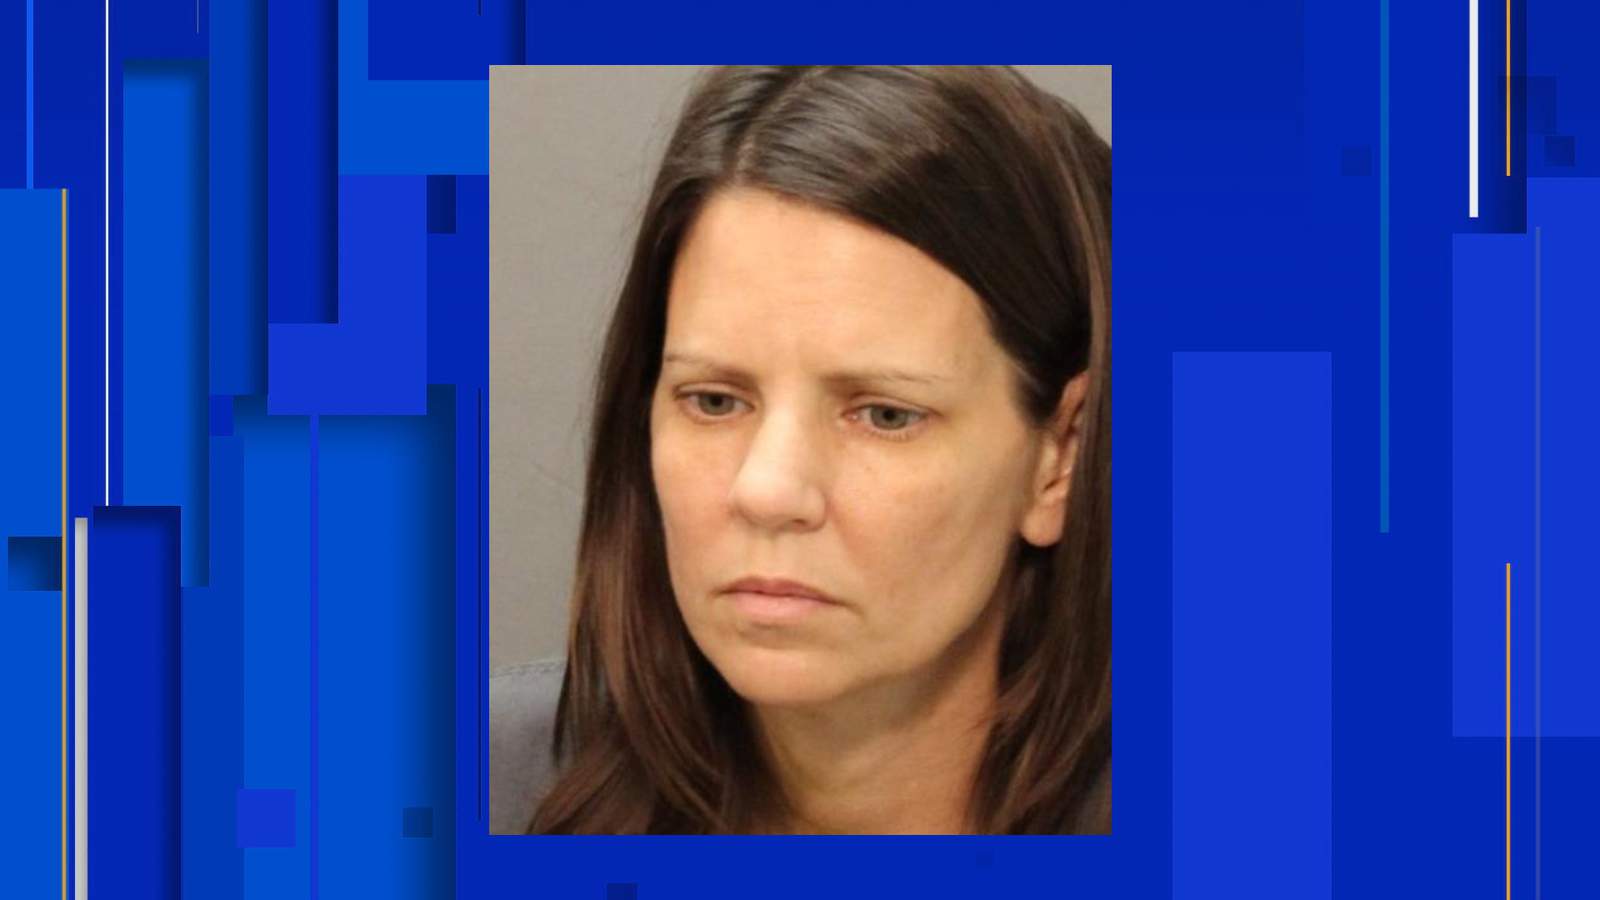 Jacksonville Beach mom now charged with murdering 3-year-old son